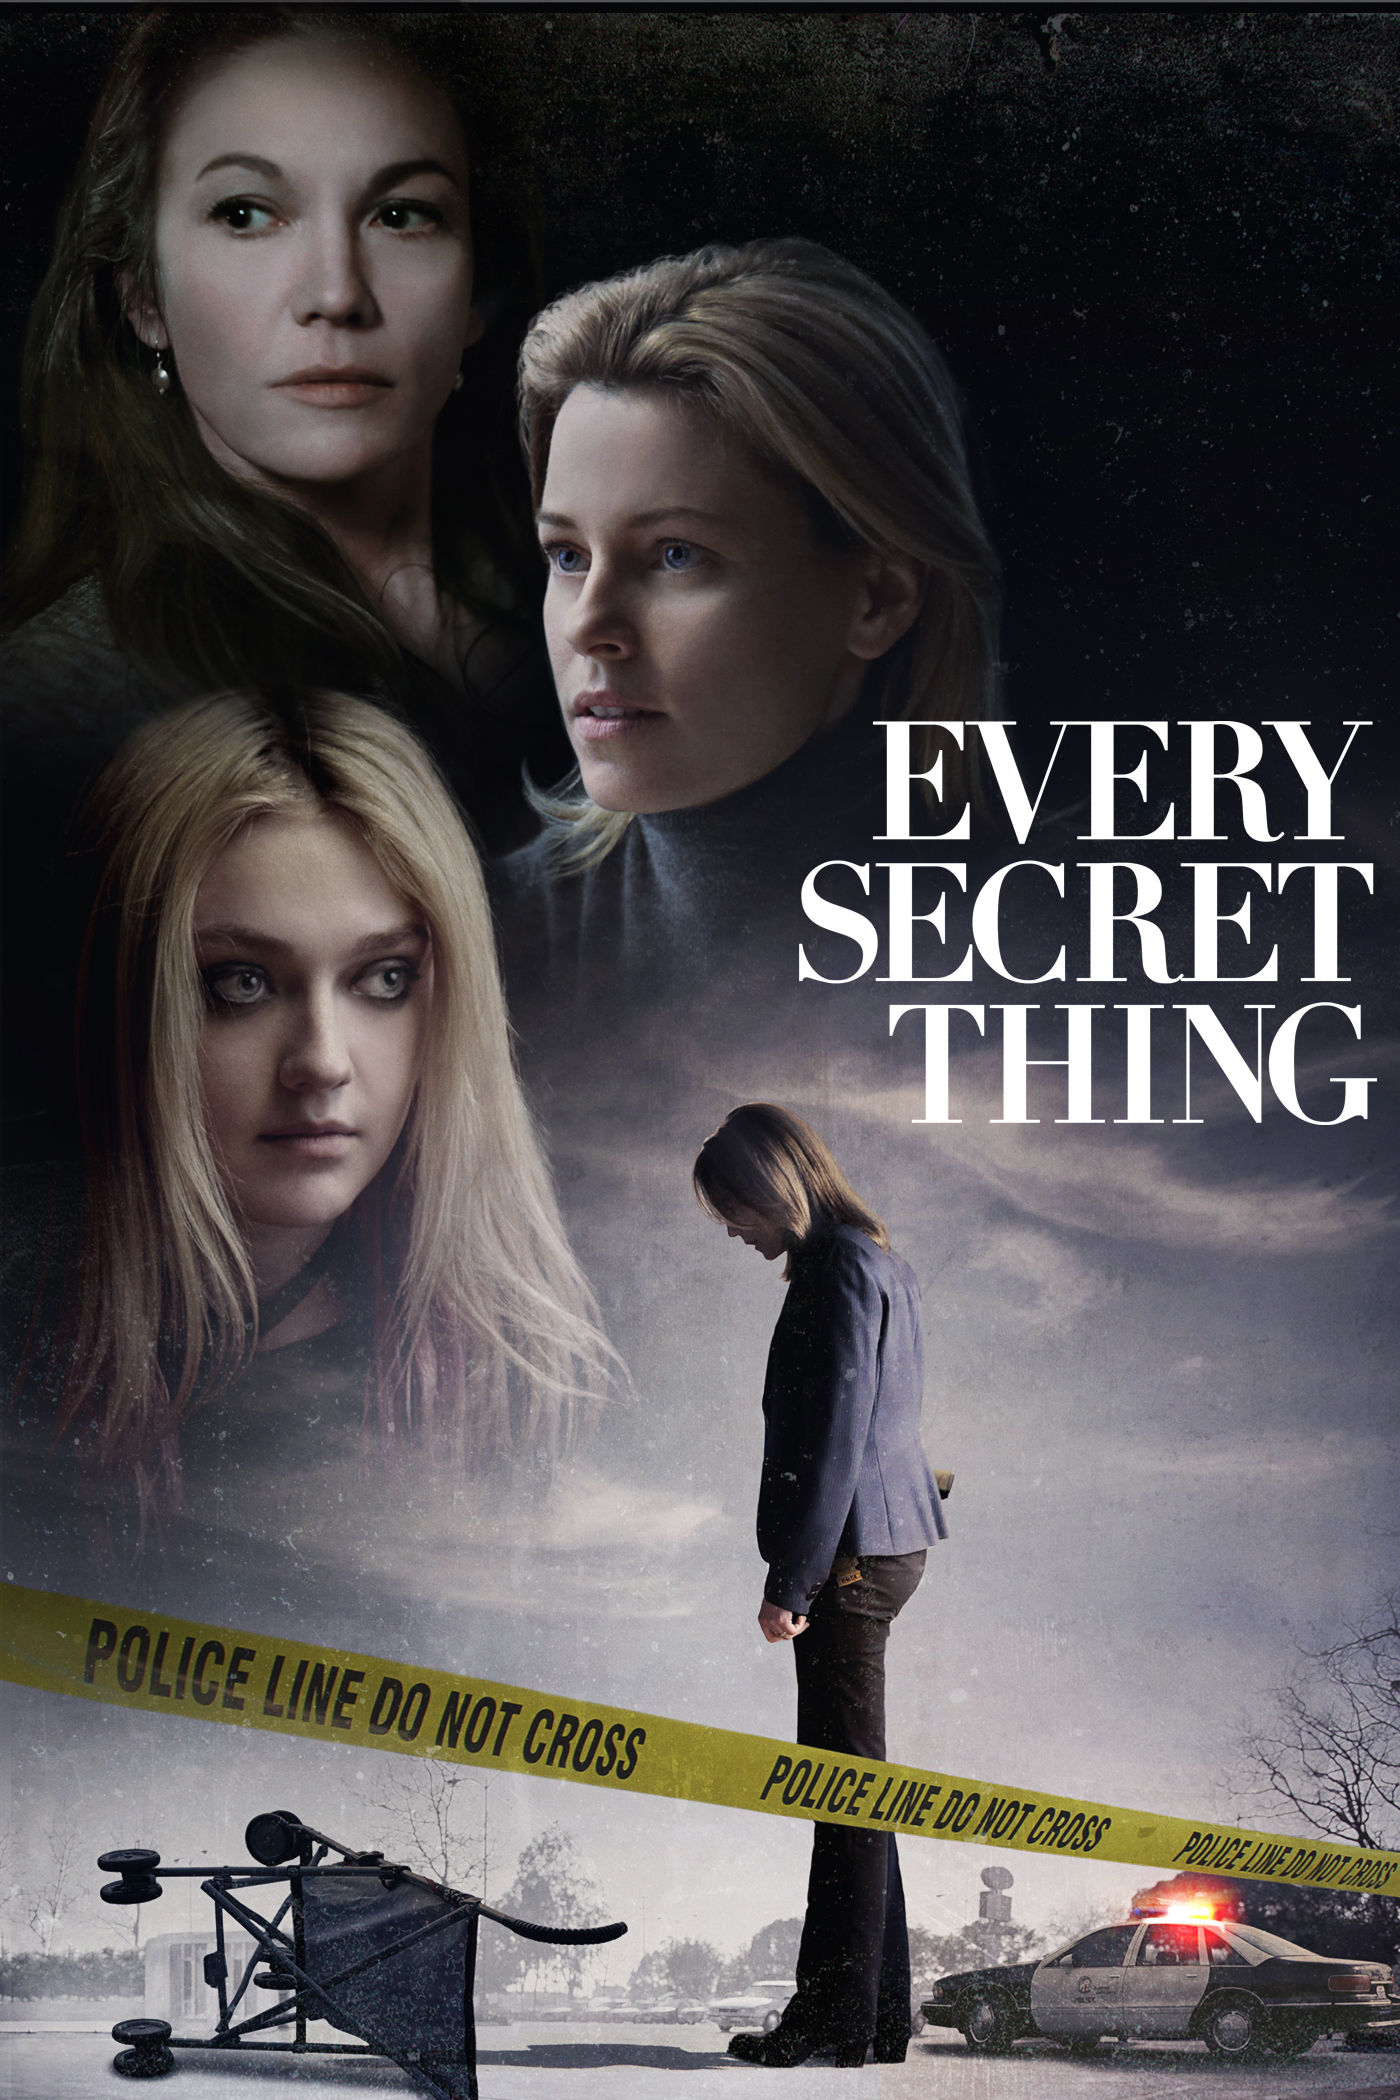 A female detective looking at a stroller, above her reads, "Every Secret Thing." Three women appear above, contrasted by a black background.